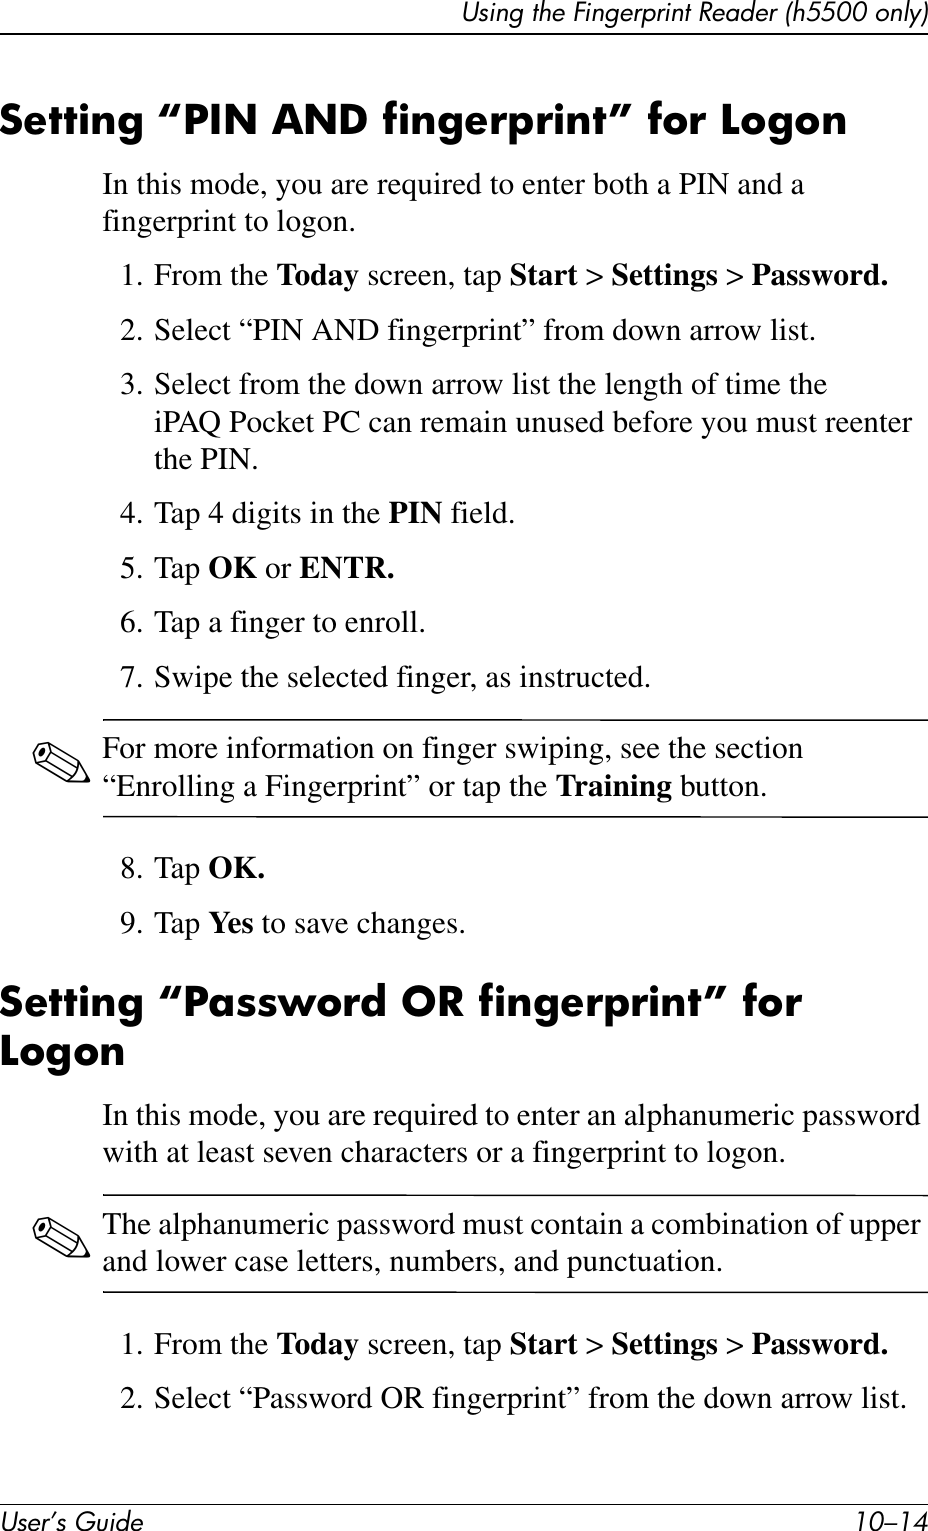 User’s Guide 10–14Using the Fingerprint Reader (h5500 only)Setting “PIN AND fingerprint” for LogonIn this mode, you are required to enter both a PIN and a fingerprint to logon.1. From the Today screen, tap Start &gt; Settings &gt; Password.2. Select “PIN AND fingerprint” from down arrow list.3. Select from the down arrow list the length of time the iPAQ Pocket PC can remain unused before you must reenter the PIN.4. Tap 4 digits in the PIN field.5. Tap OK or ENTR.6. Tap a finger to enroll.7. Swipe the selected finger, as instructed.✎For more information on finger swiping, see the section “Enrolling a Fingerprint” or tap the Training button.8. Tap OK.9. Tap Ye s  to save changes.Setting “Password OR fingerprint” for LogonIn this mode, you are required to enter an alphanumeric password with at least seven characters or a fingerprint to logon.✎The alphanumeric password must contain a combination of upper and lower case letters, numbers, and punctuation.1. From the Today screen, tap Start &gt; Settings &gt; Password.2. Select “Password OR fingerprint” from the down arrow list.